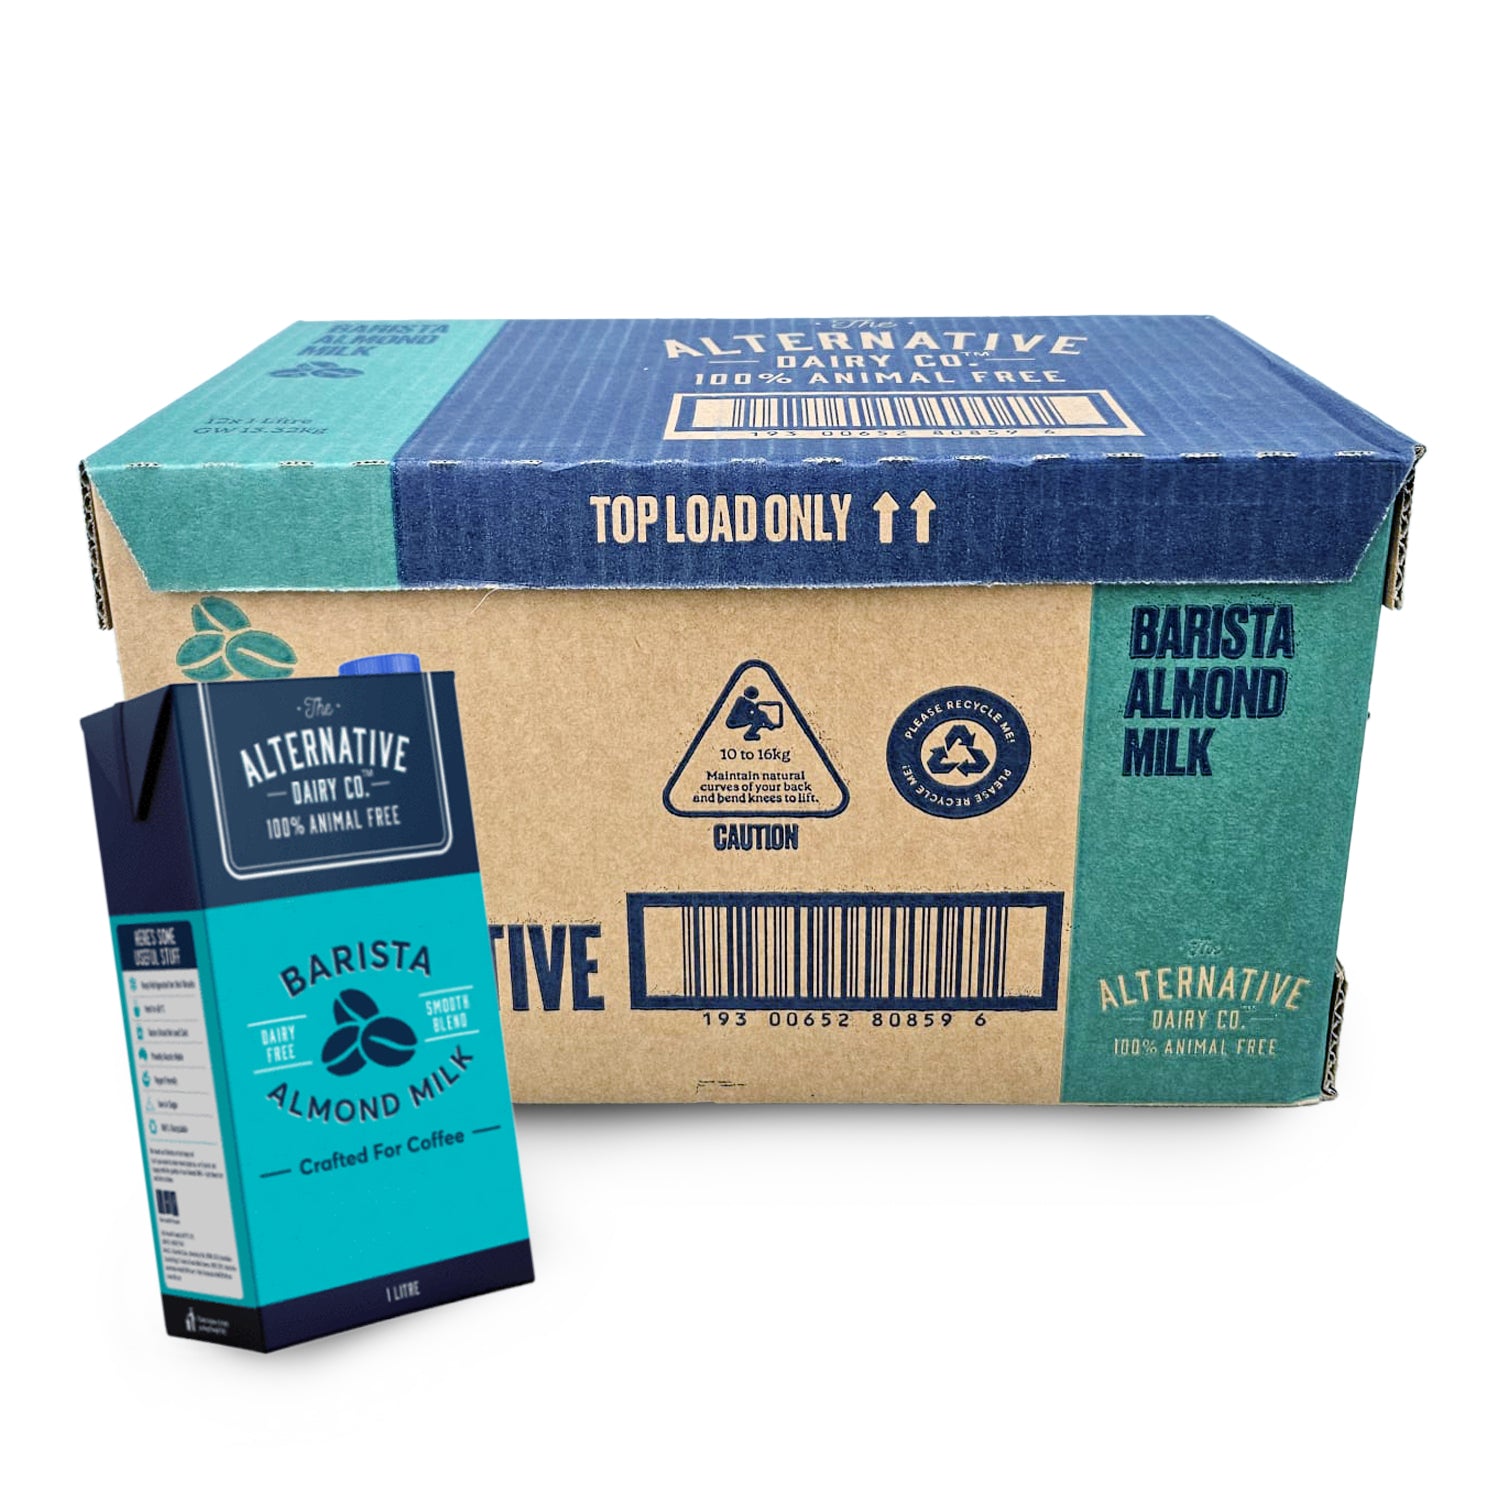 Alternative Dairy Co. - Almond Milk - 10 Cases $389 - PICK UP ONLY